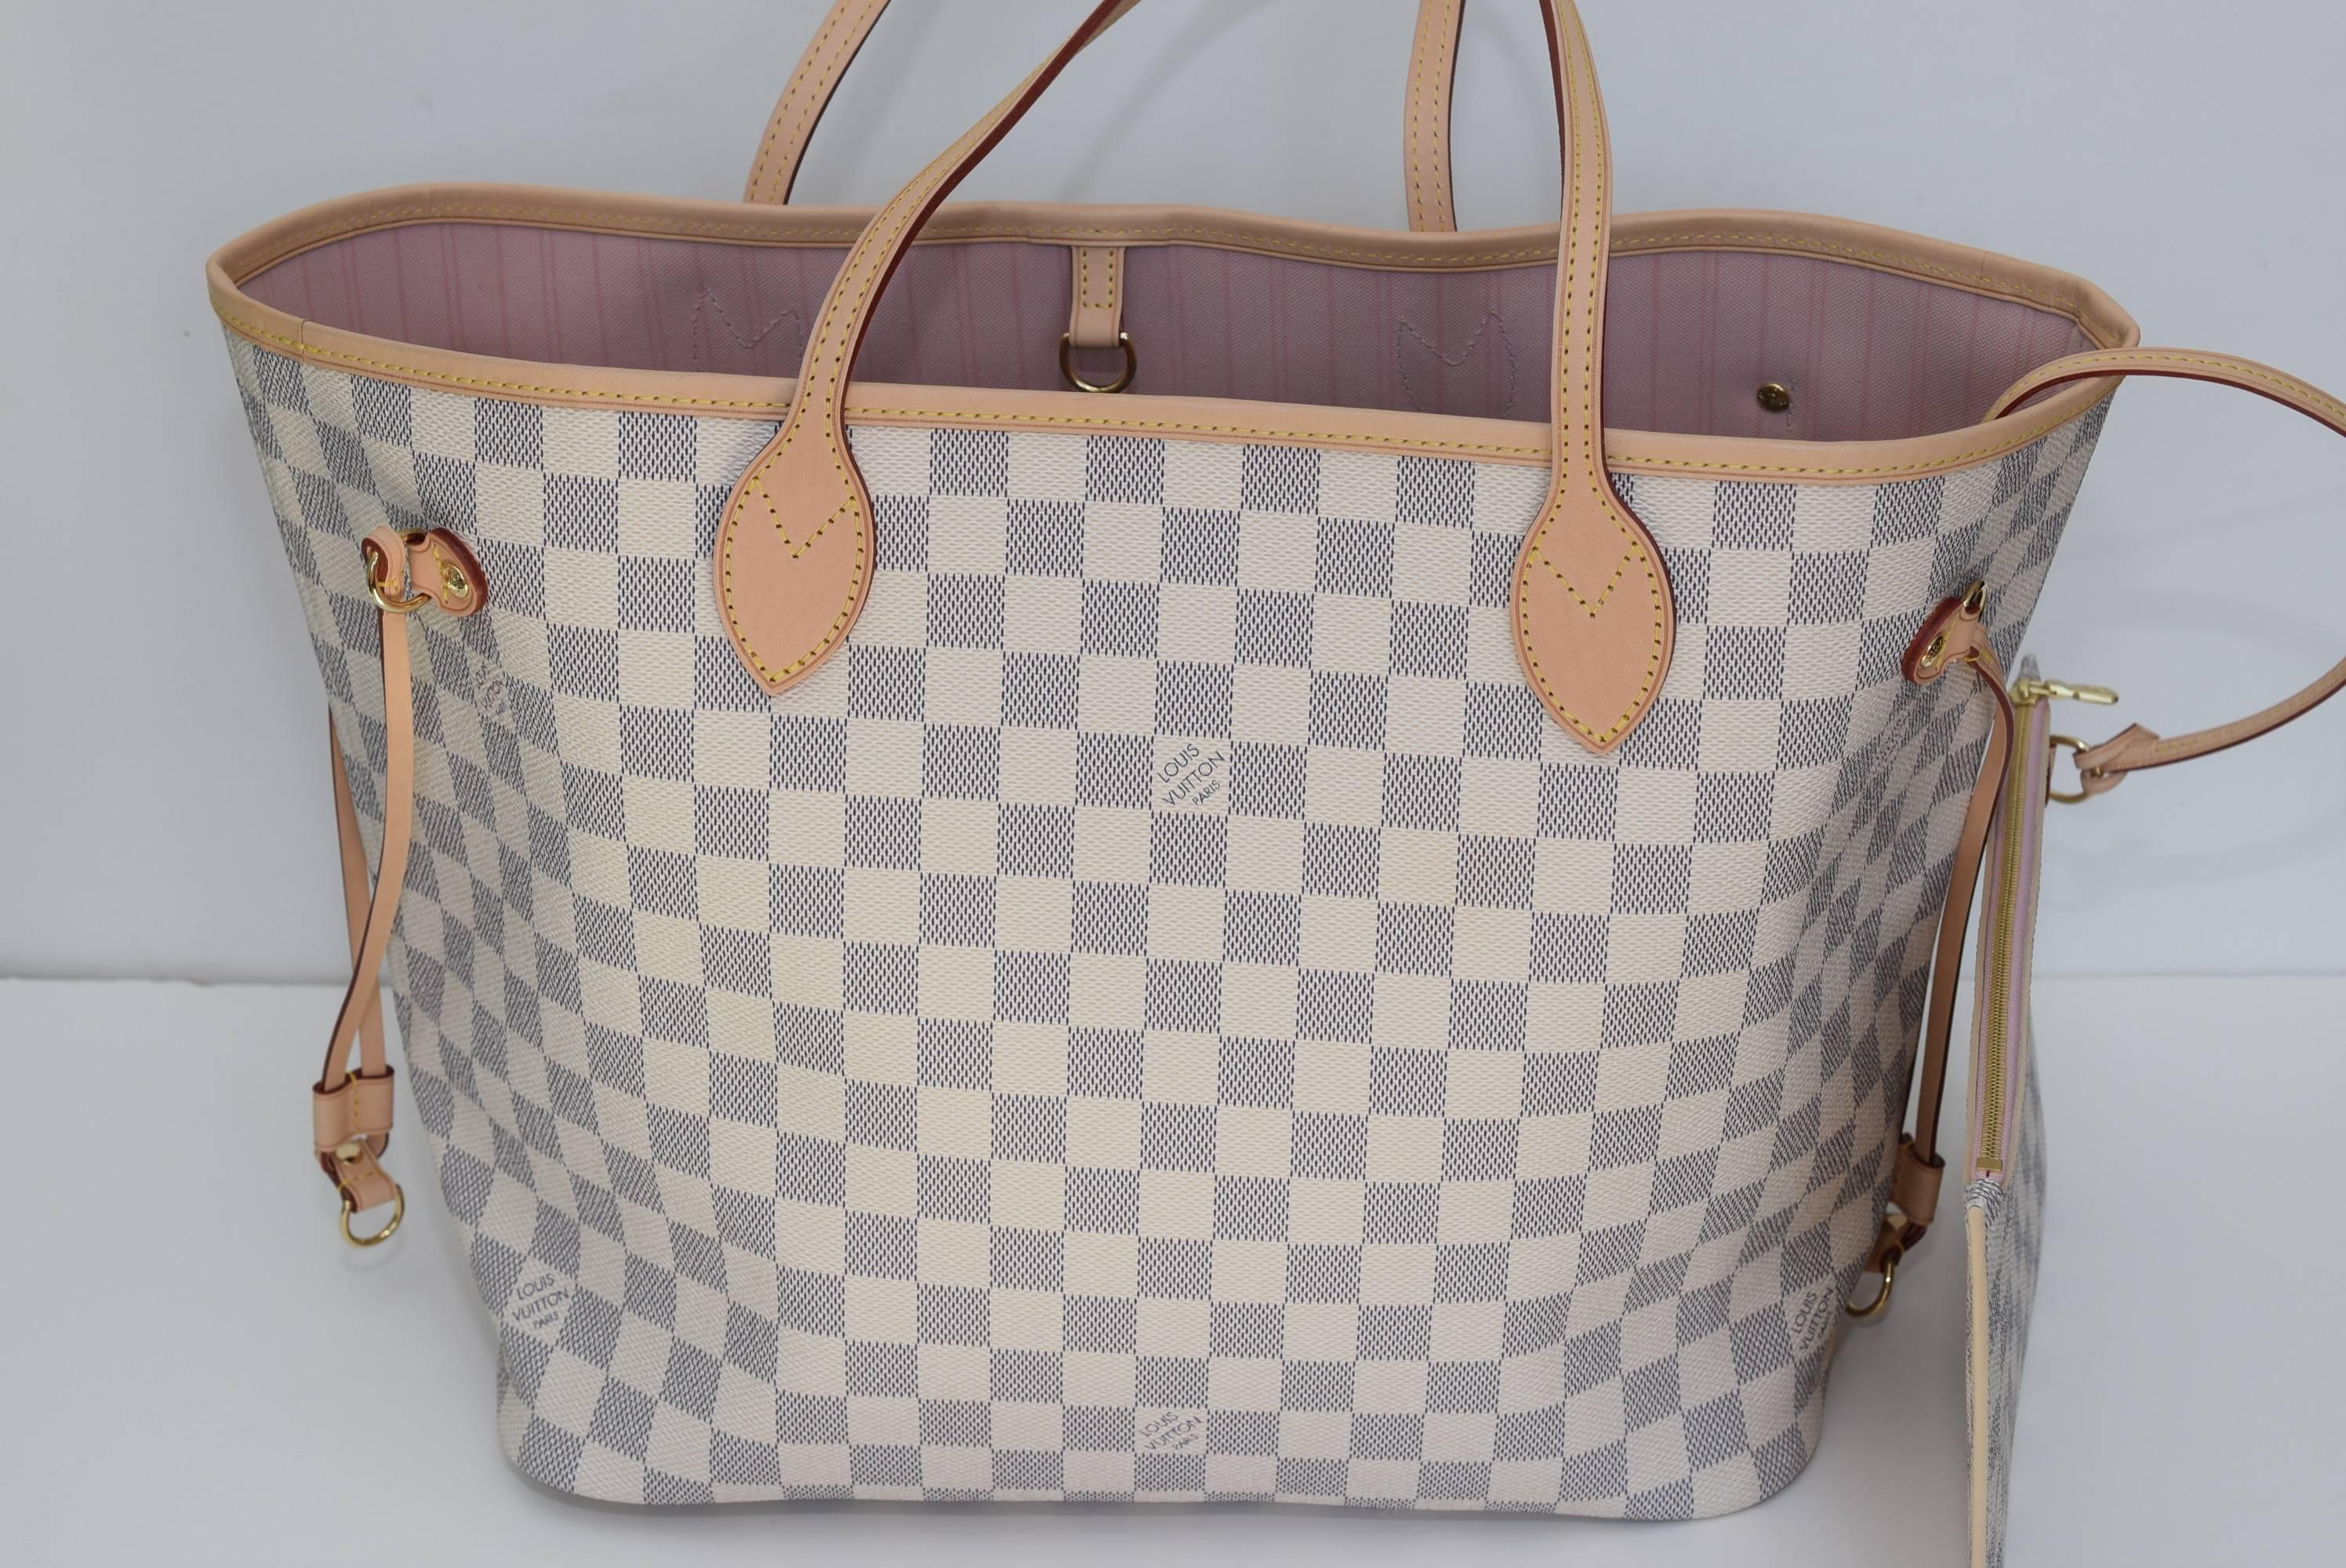 Brand New 2016! Louis Vuitton Neverfull mm in Damier Azur with Pink Ballerine lining. Pochette Box, receipts, dust bag all included - Date code SR1106 - Made in France 